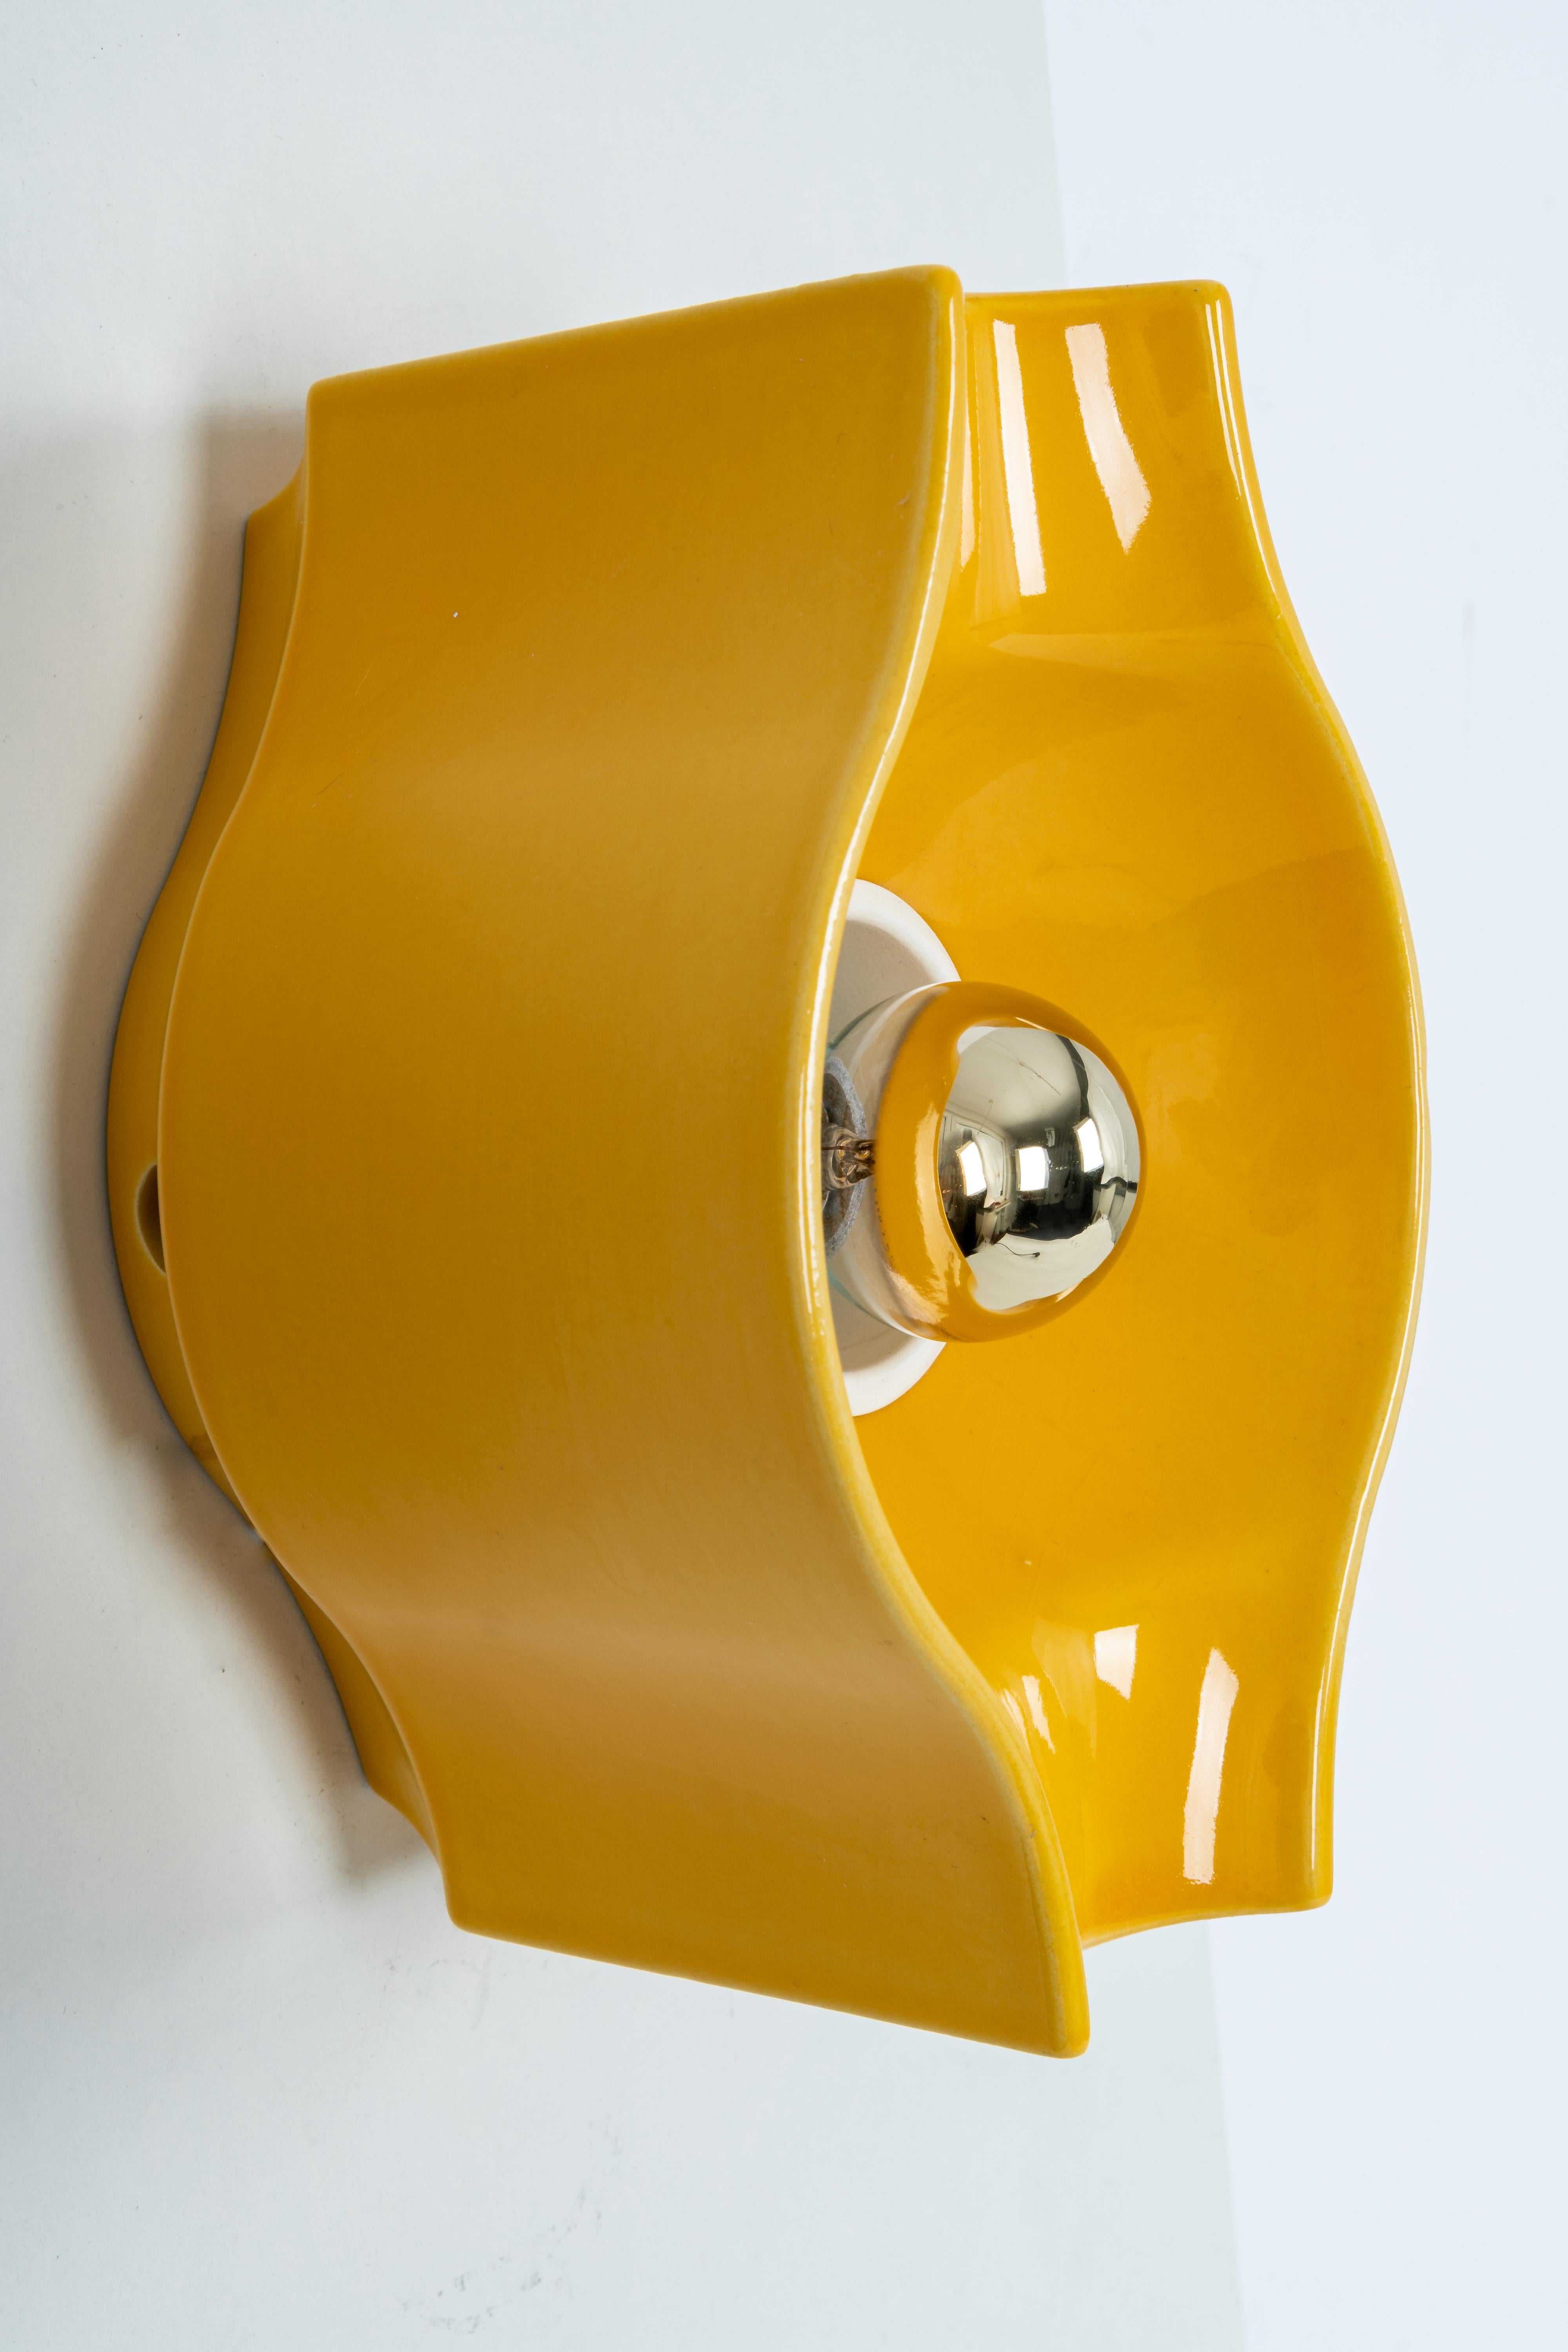 Pair of Ceramic Yellow Wall Light Sputnik Designed by Cari Zalloni Germany 1970s For Sale 1